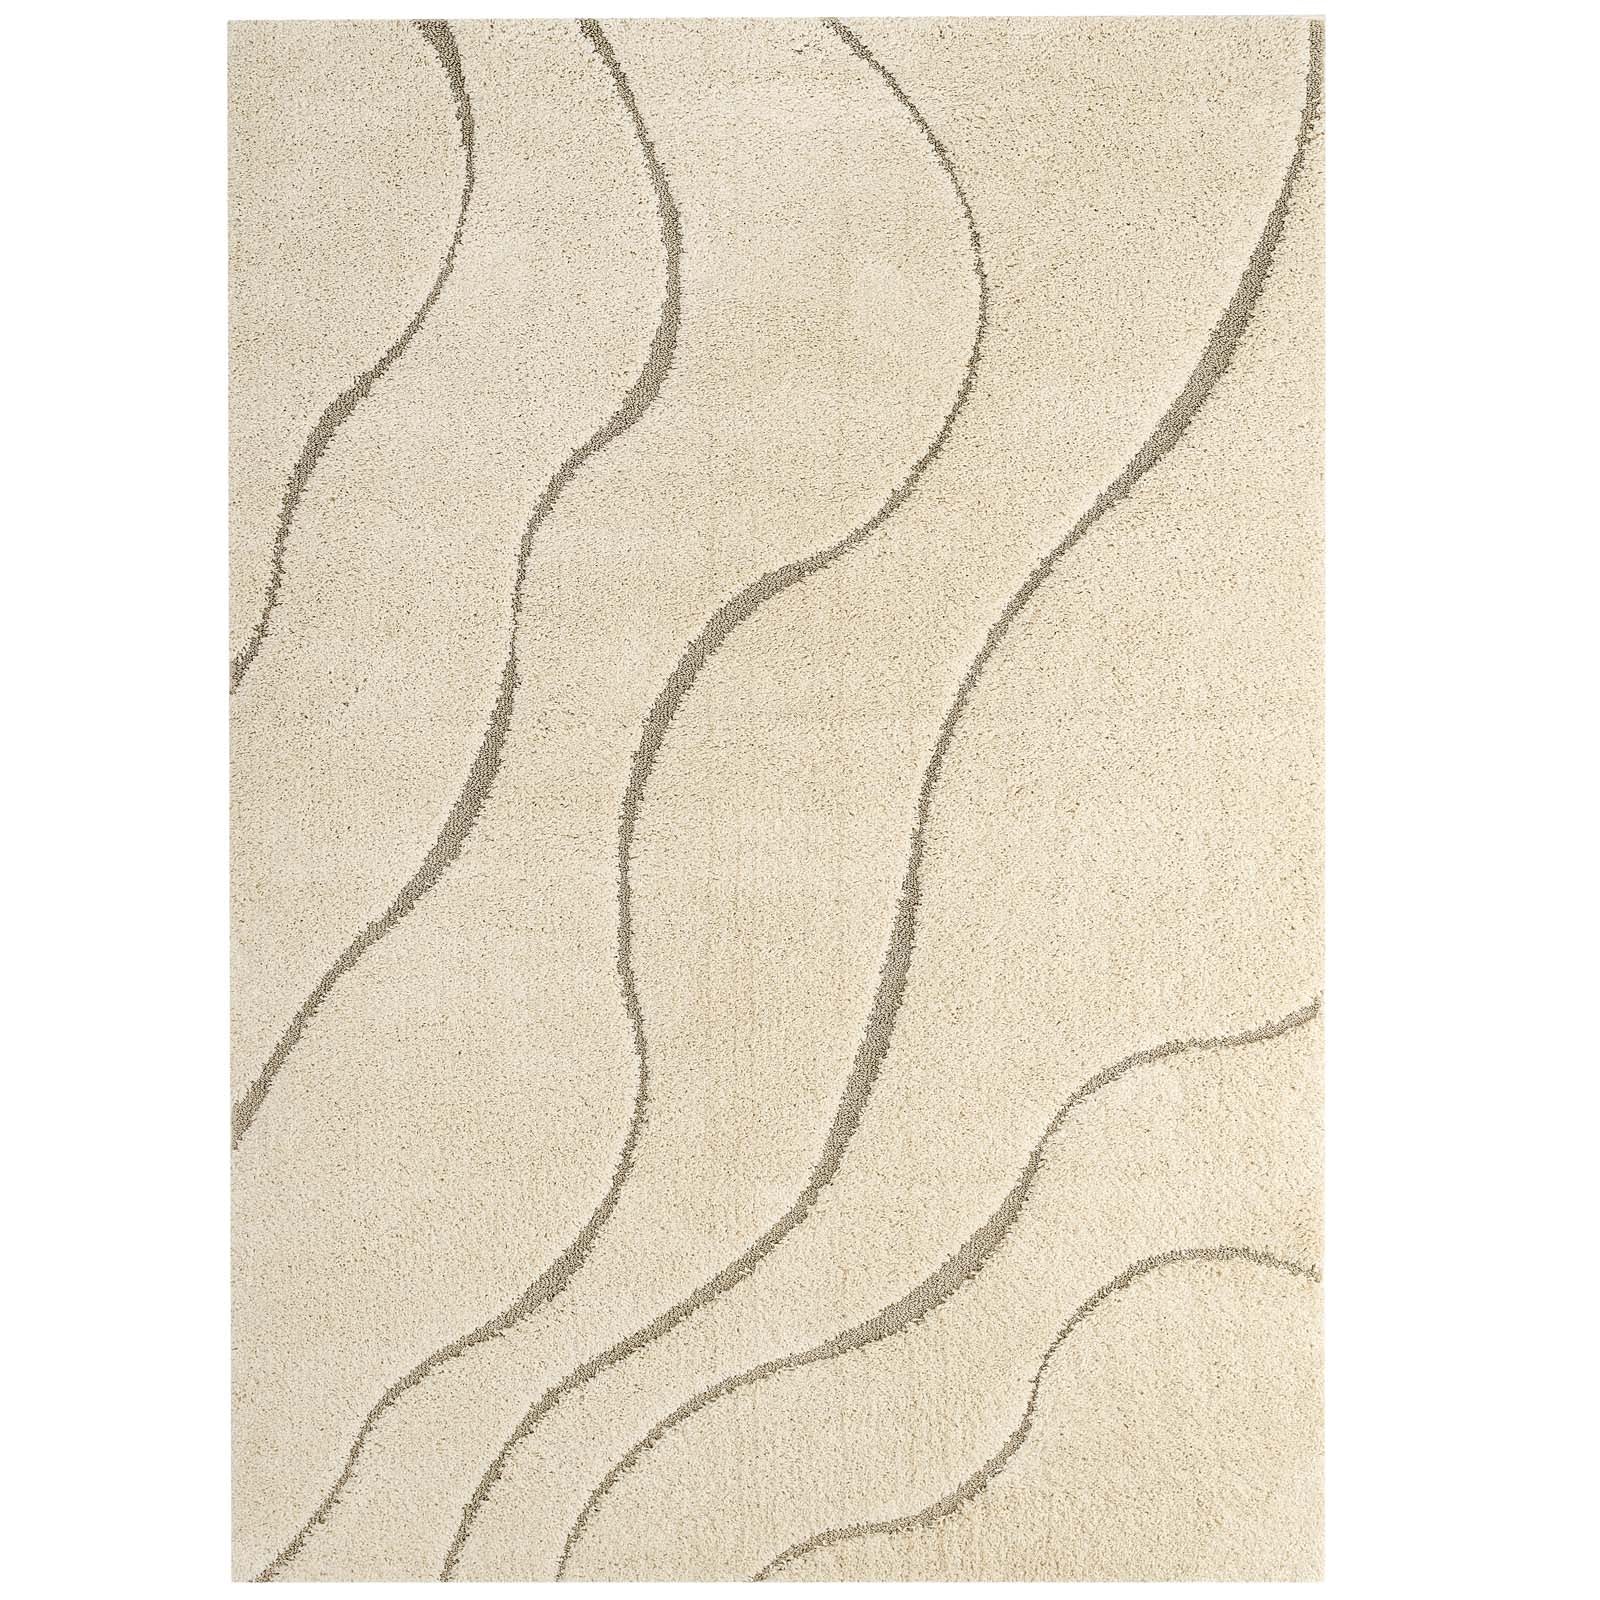 Jubilant Abound Abstract Swirl 5x8 Shag Area Rug